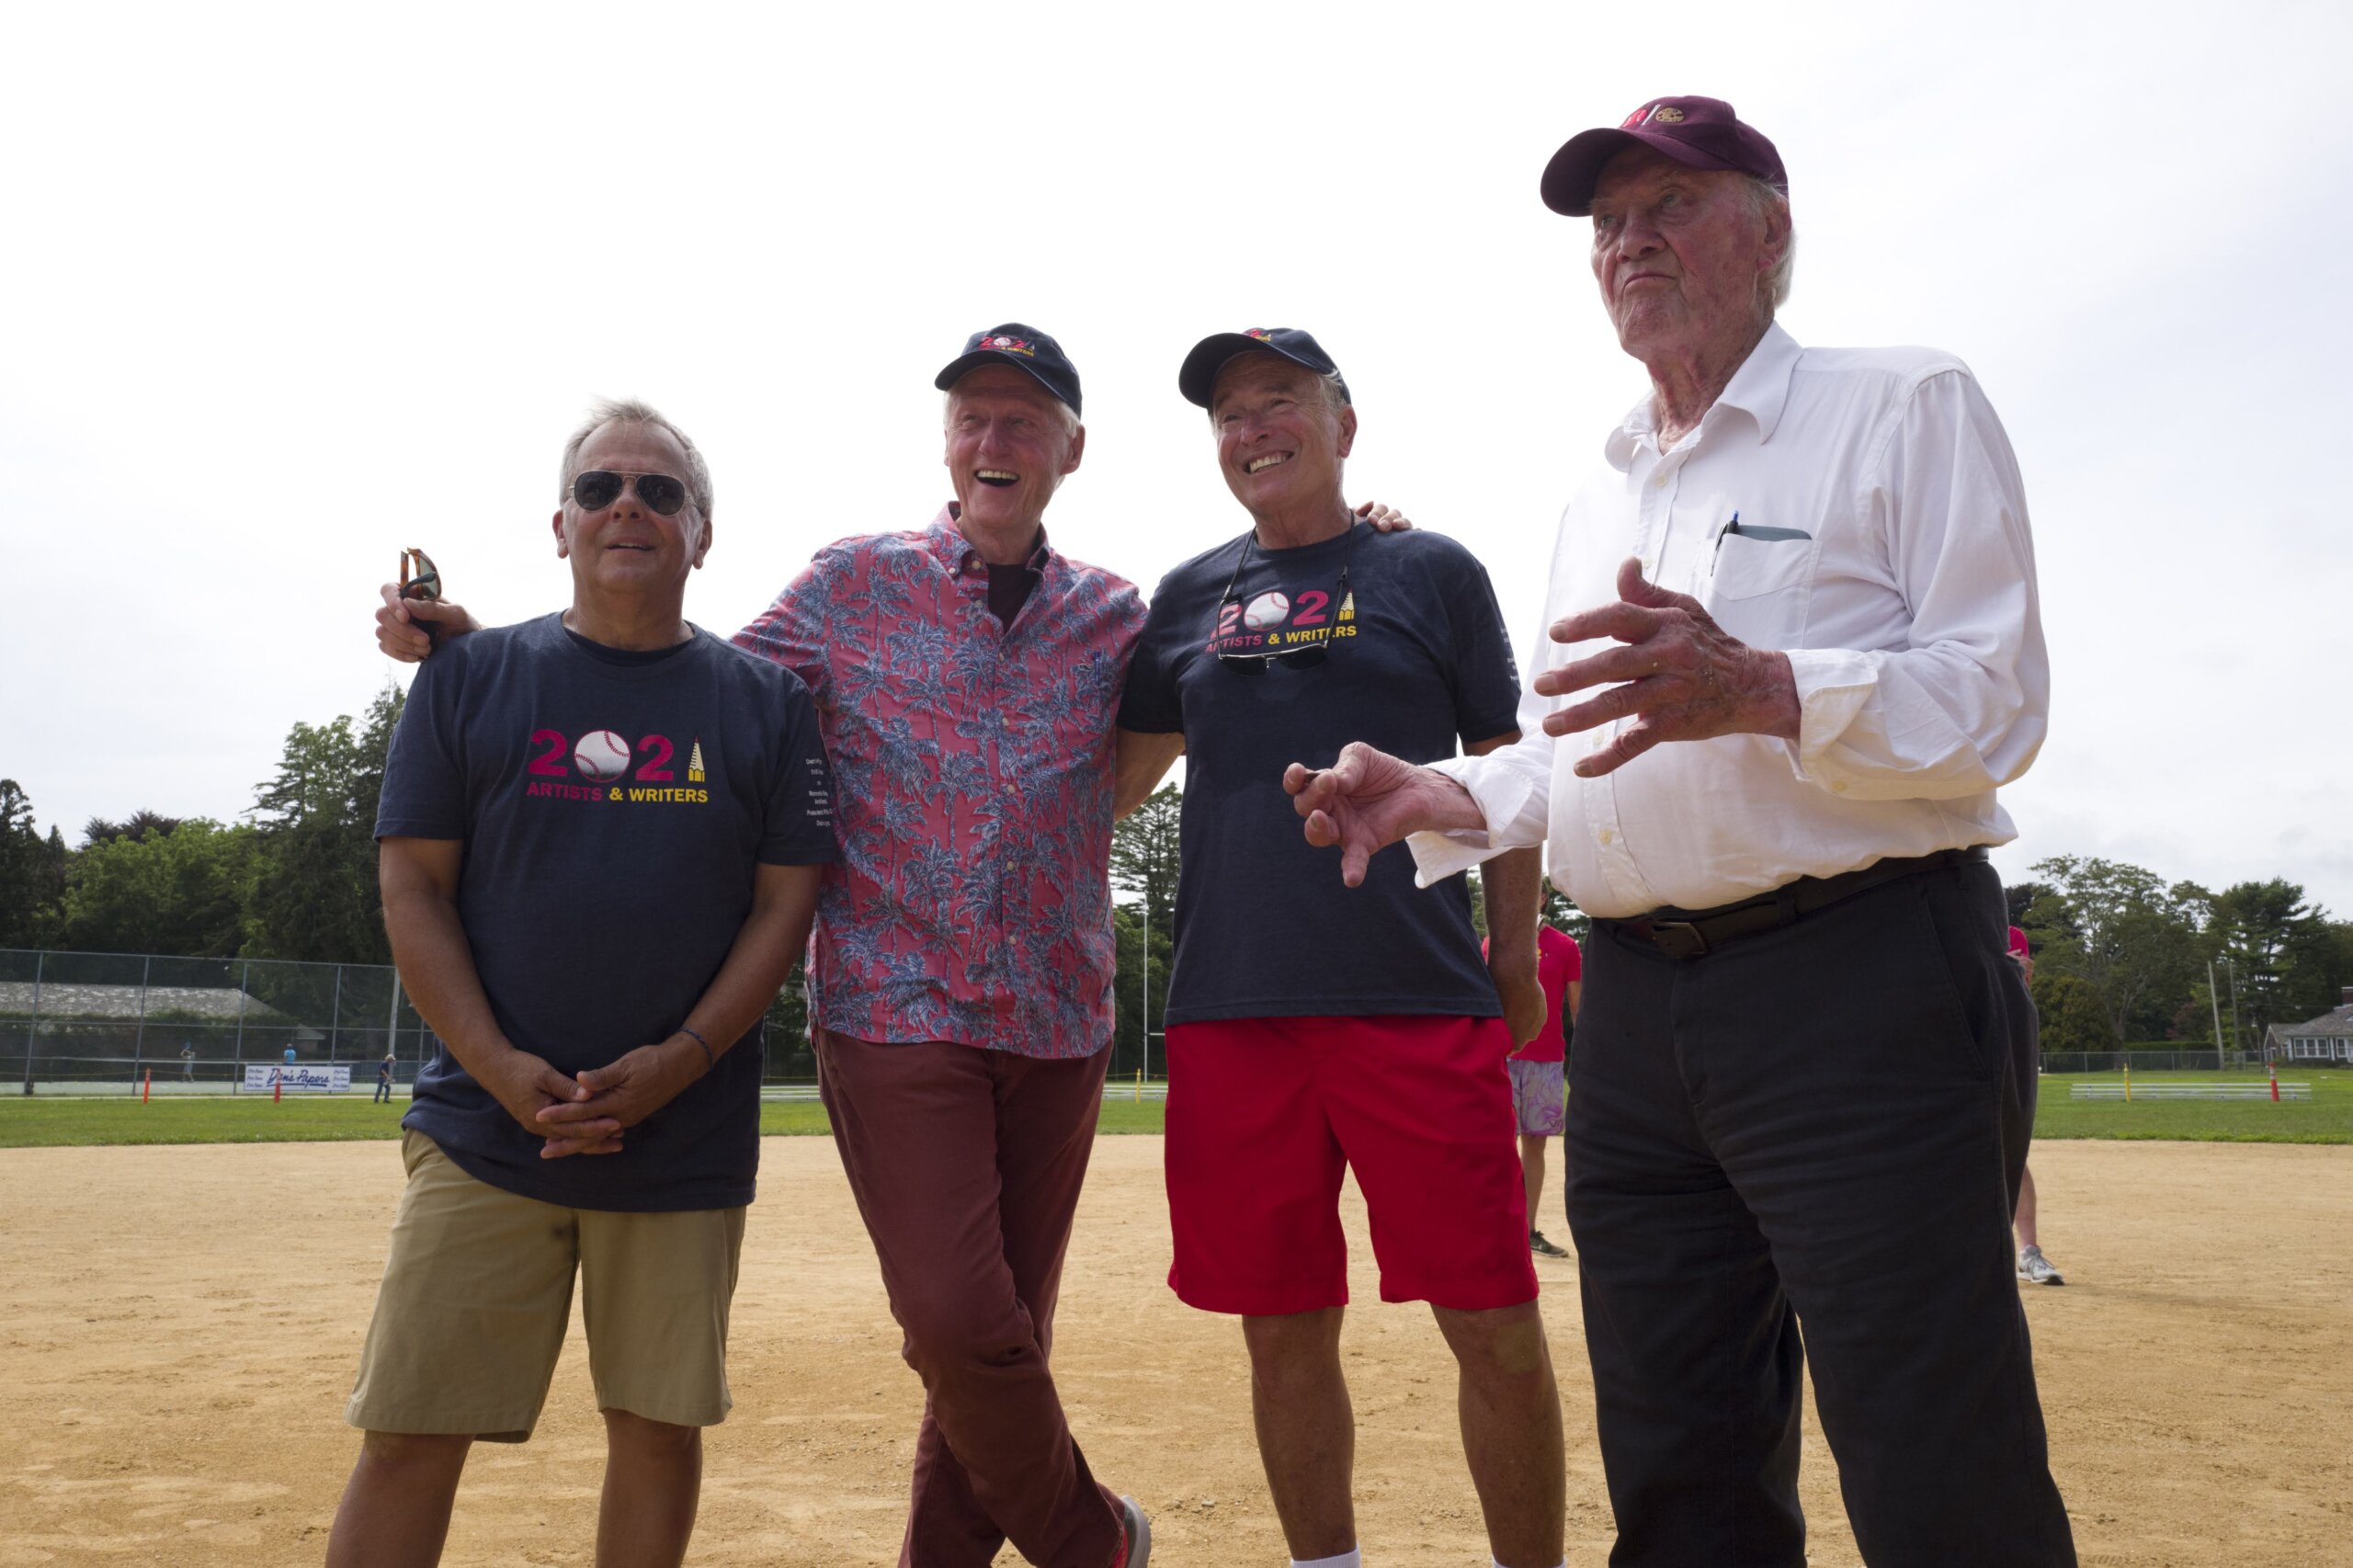 Mike Lupica, President Clinton, Ken Auletta, Leif Hope at the Artists & Writers Game